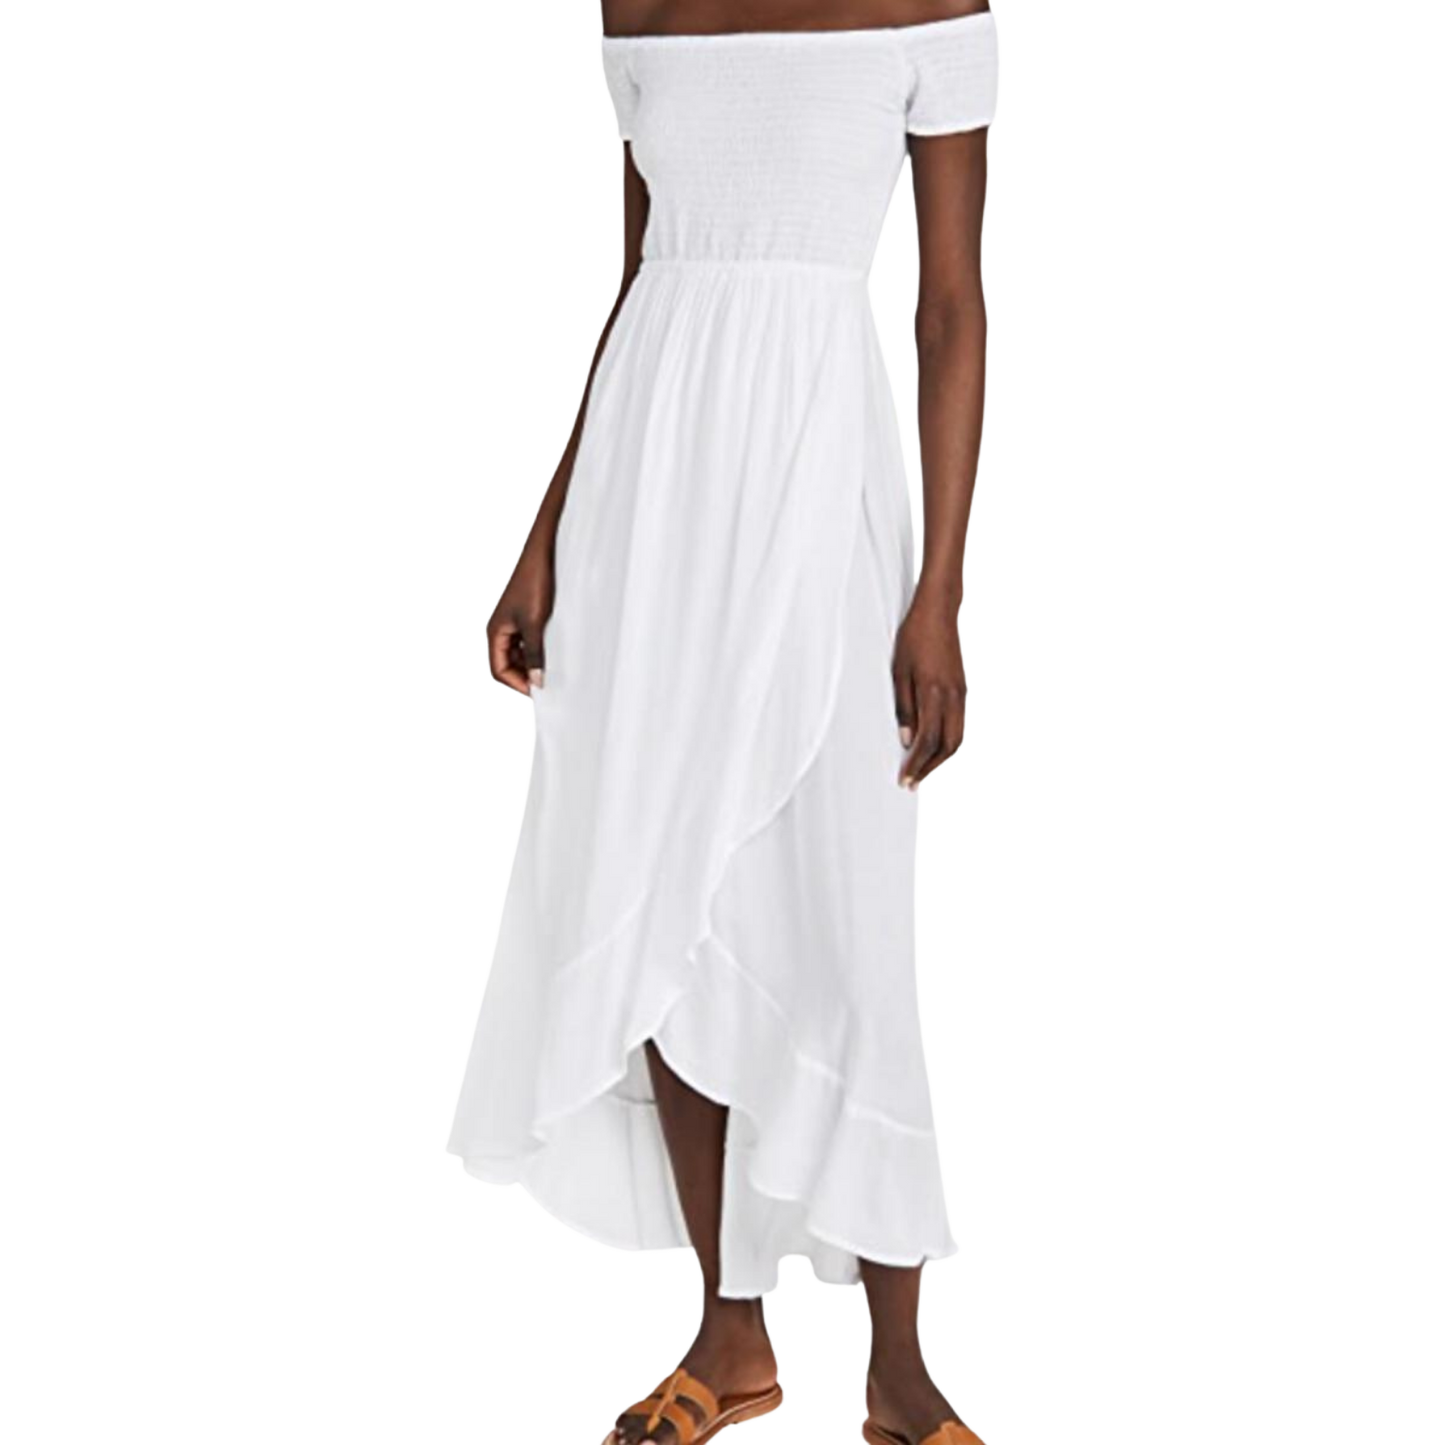 Load image into Gallery viewer, Tiare Hawaii Cheyenne White Dress (1 Size)
